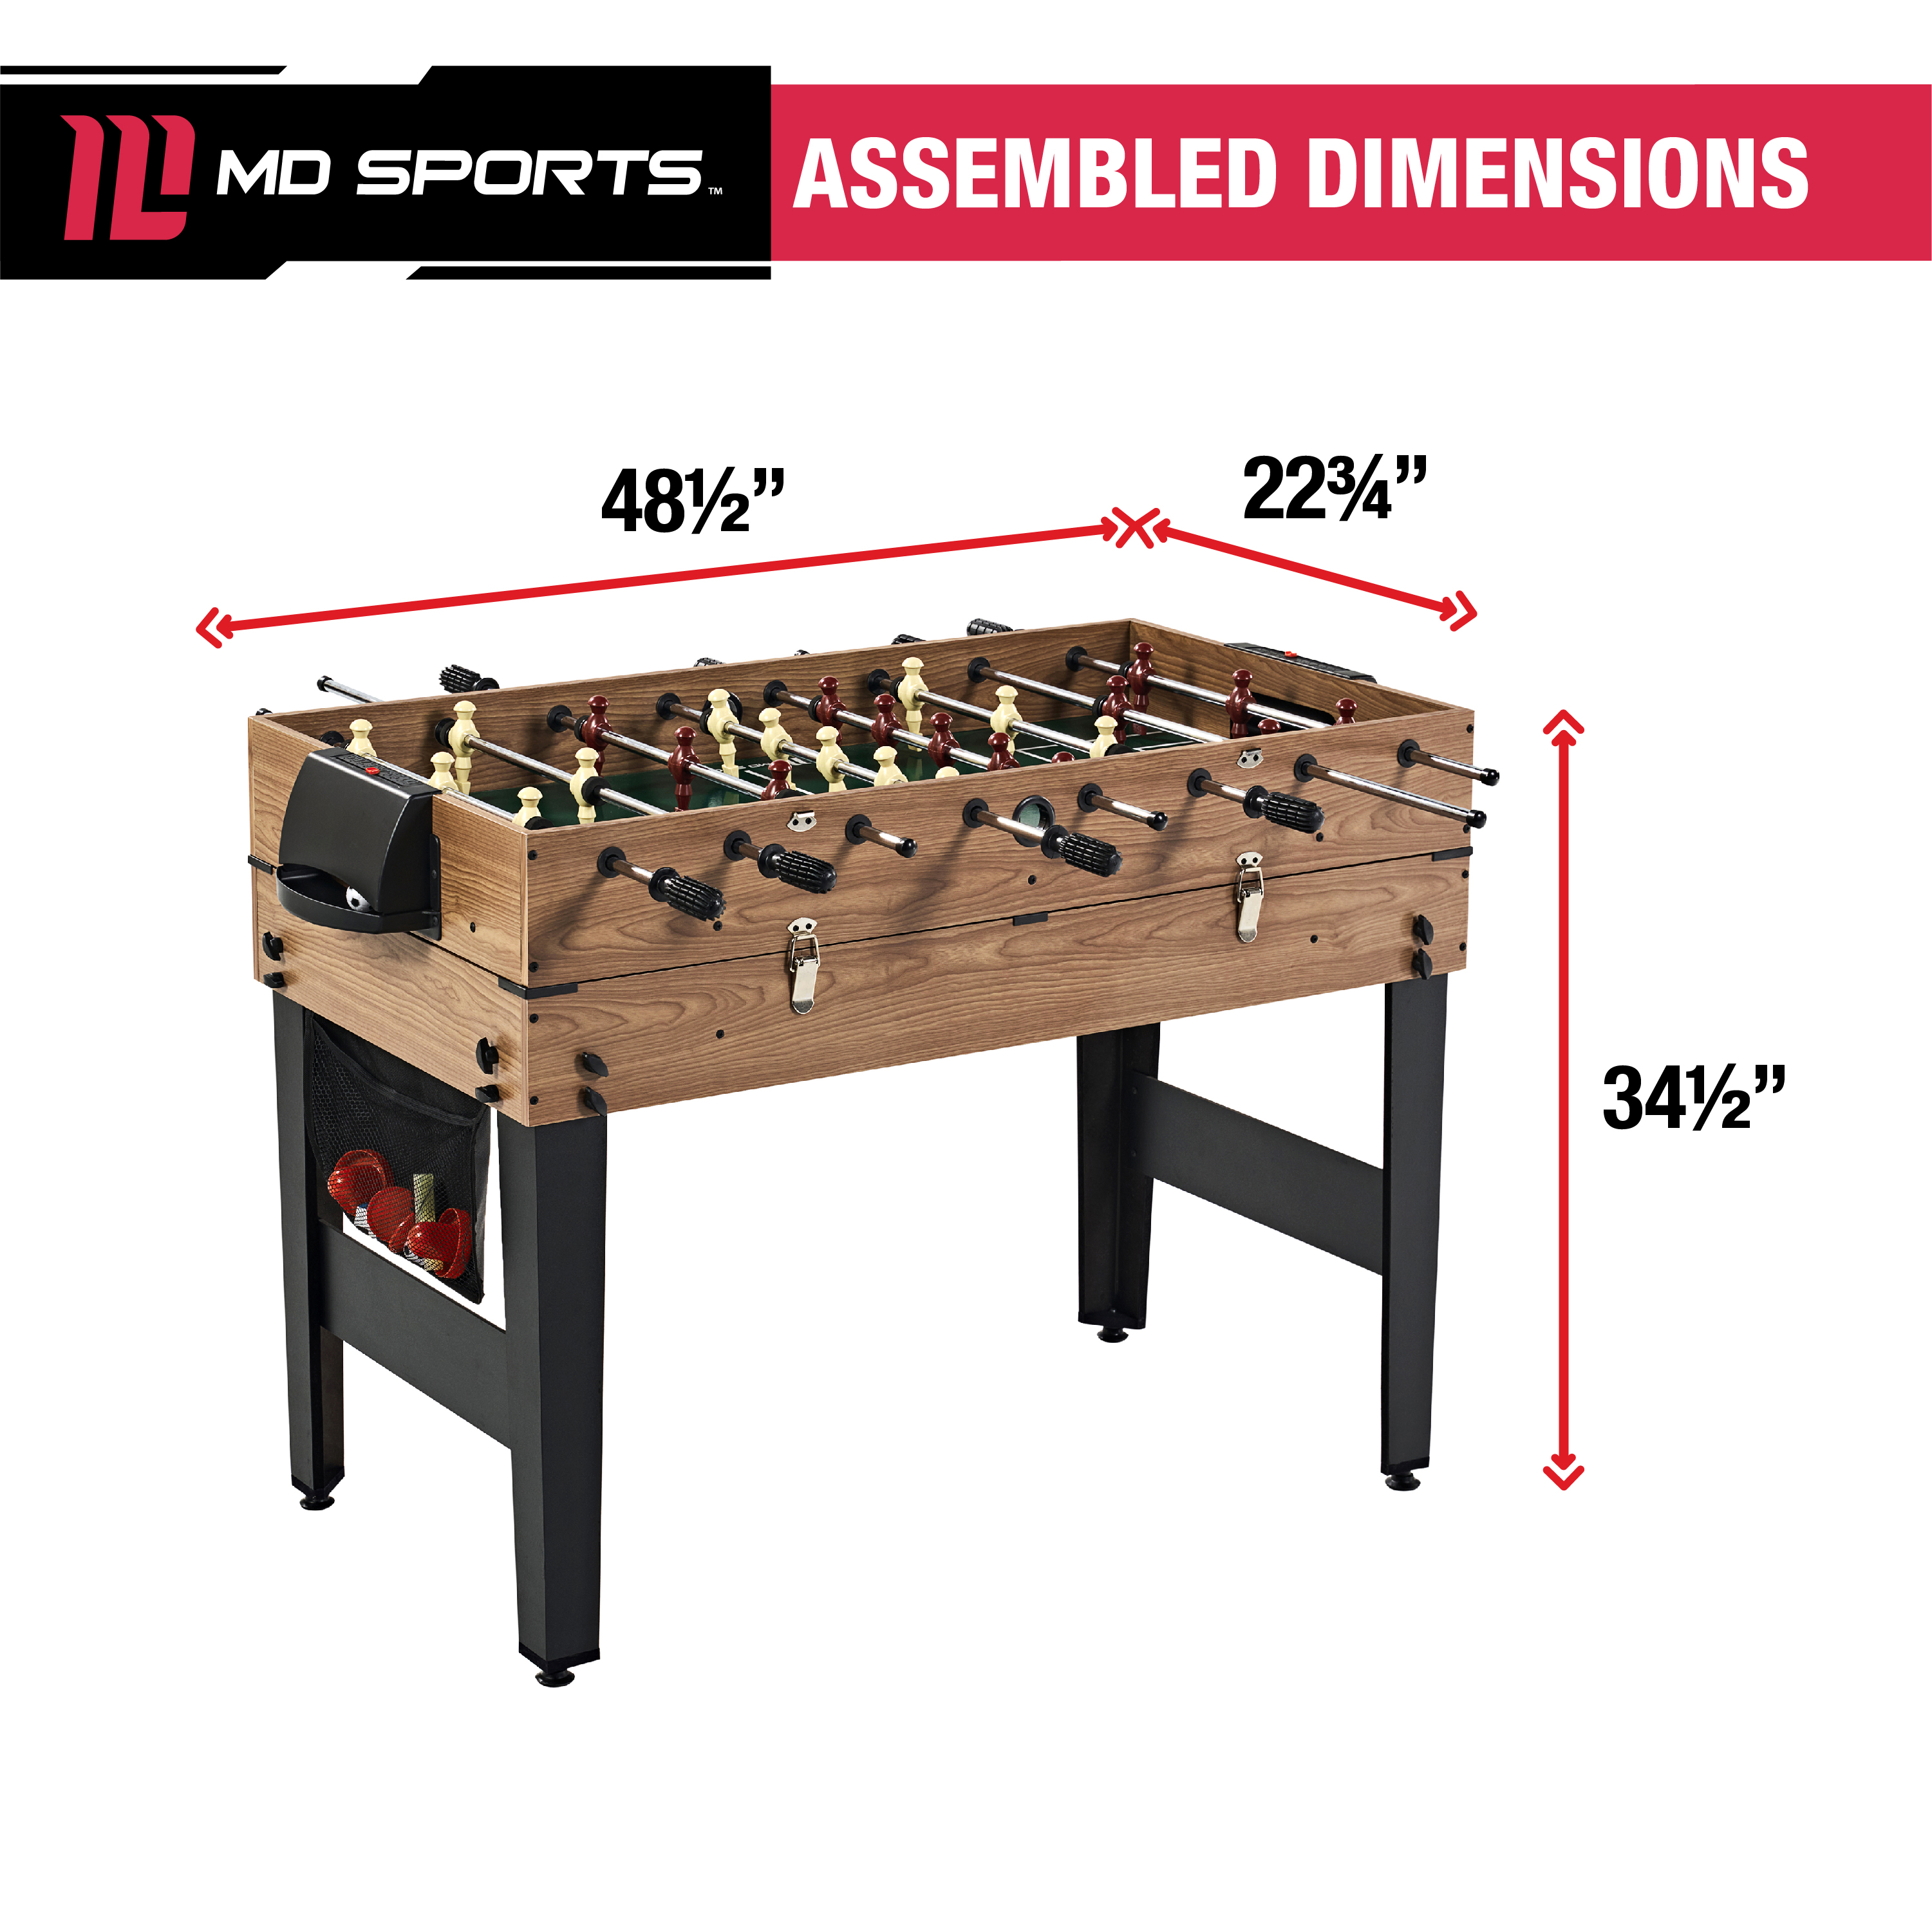 MD Sports 48" 3 In 1 Combo Game Table, Pool, Hockey, Foosball, Accessories Included - image 3 of 10